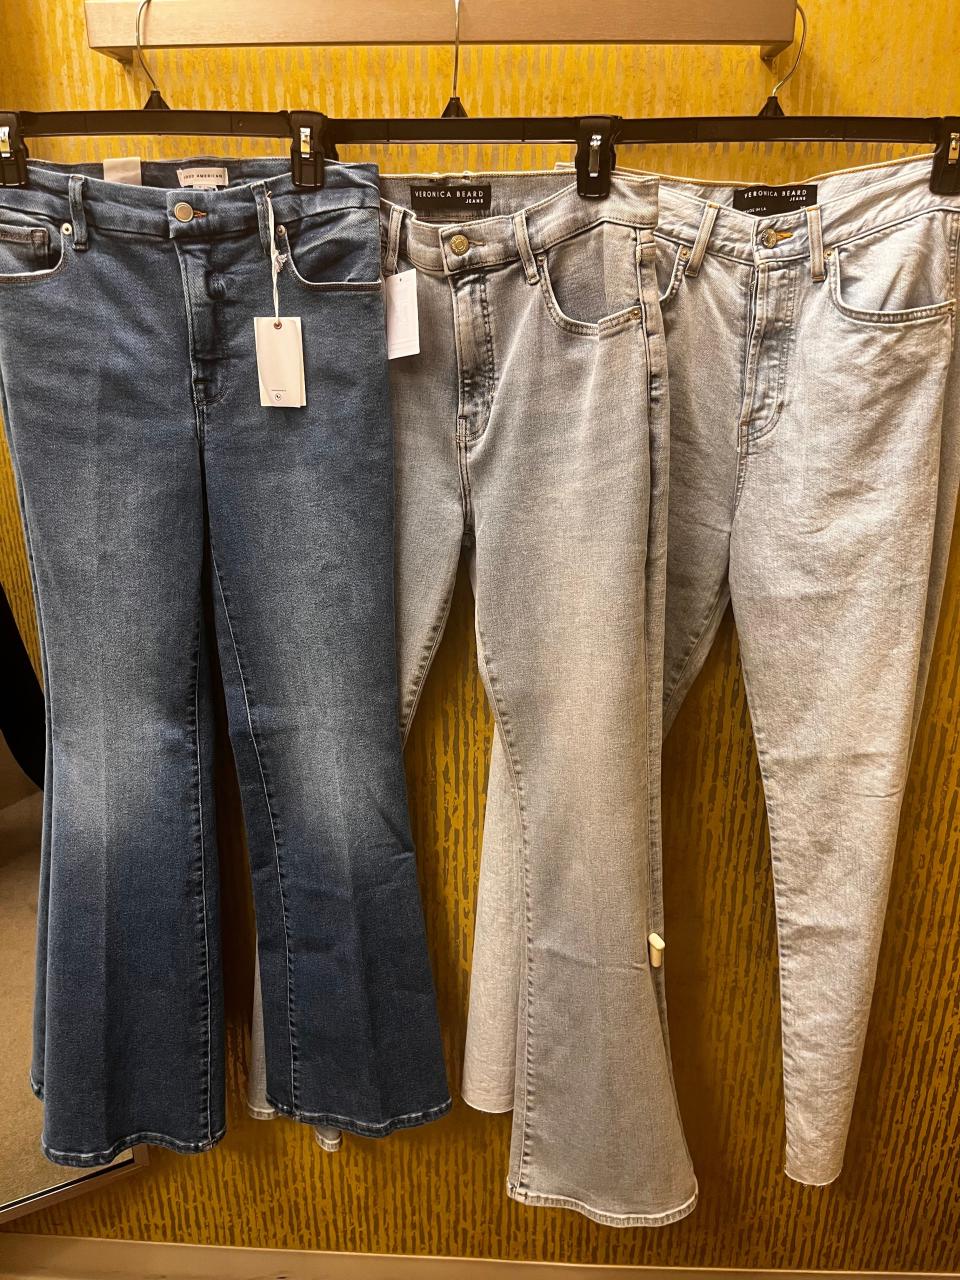 A rack of jeans in a Nordstrom dressing room.